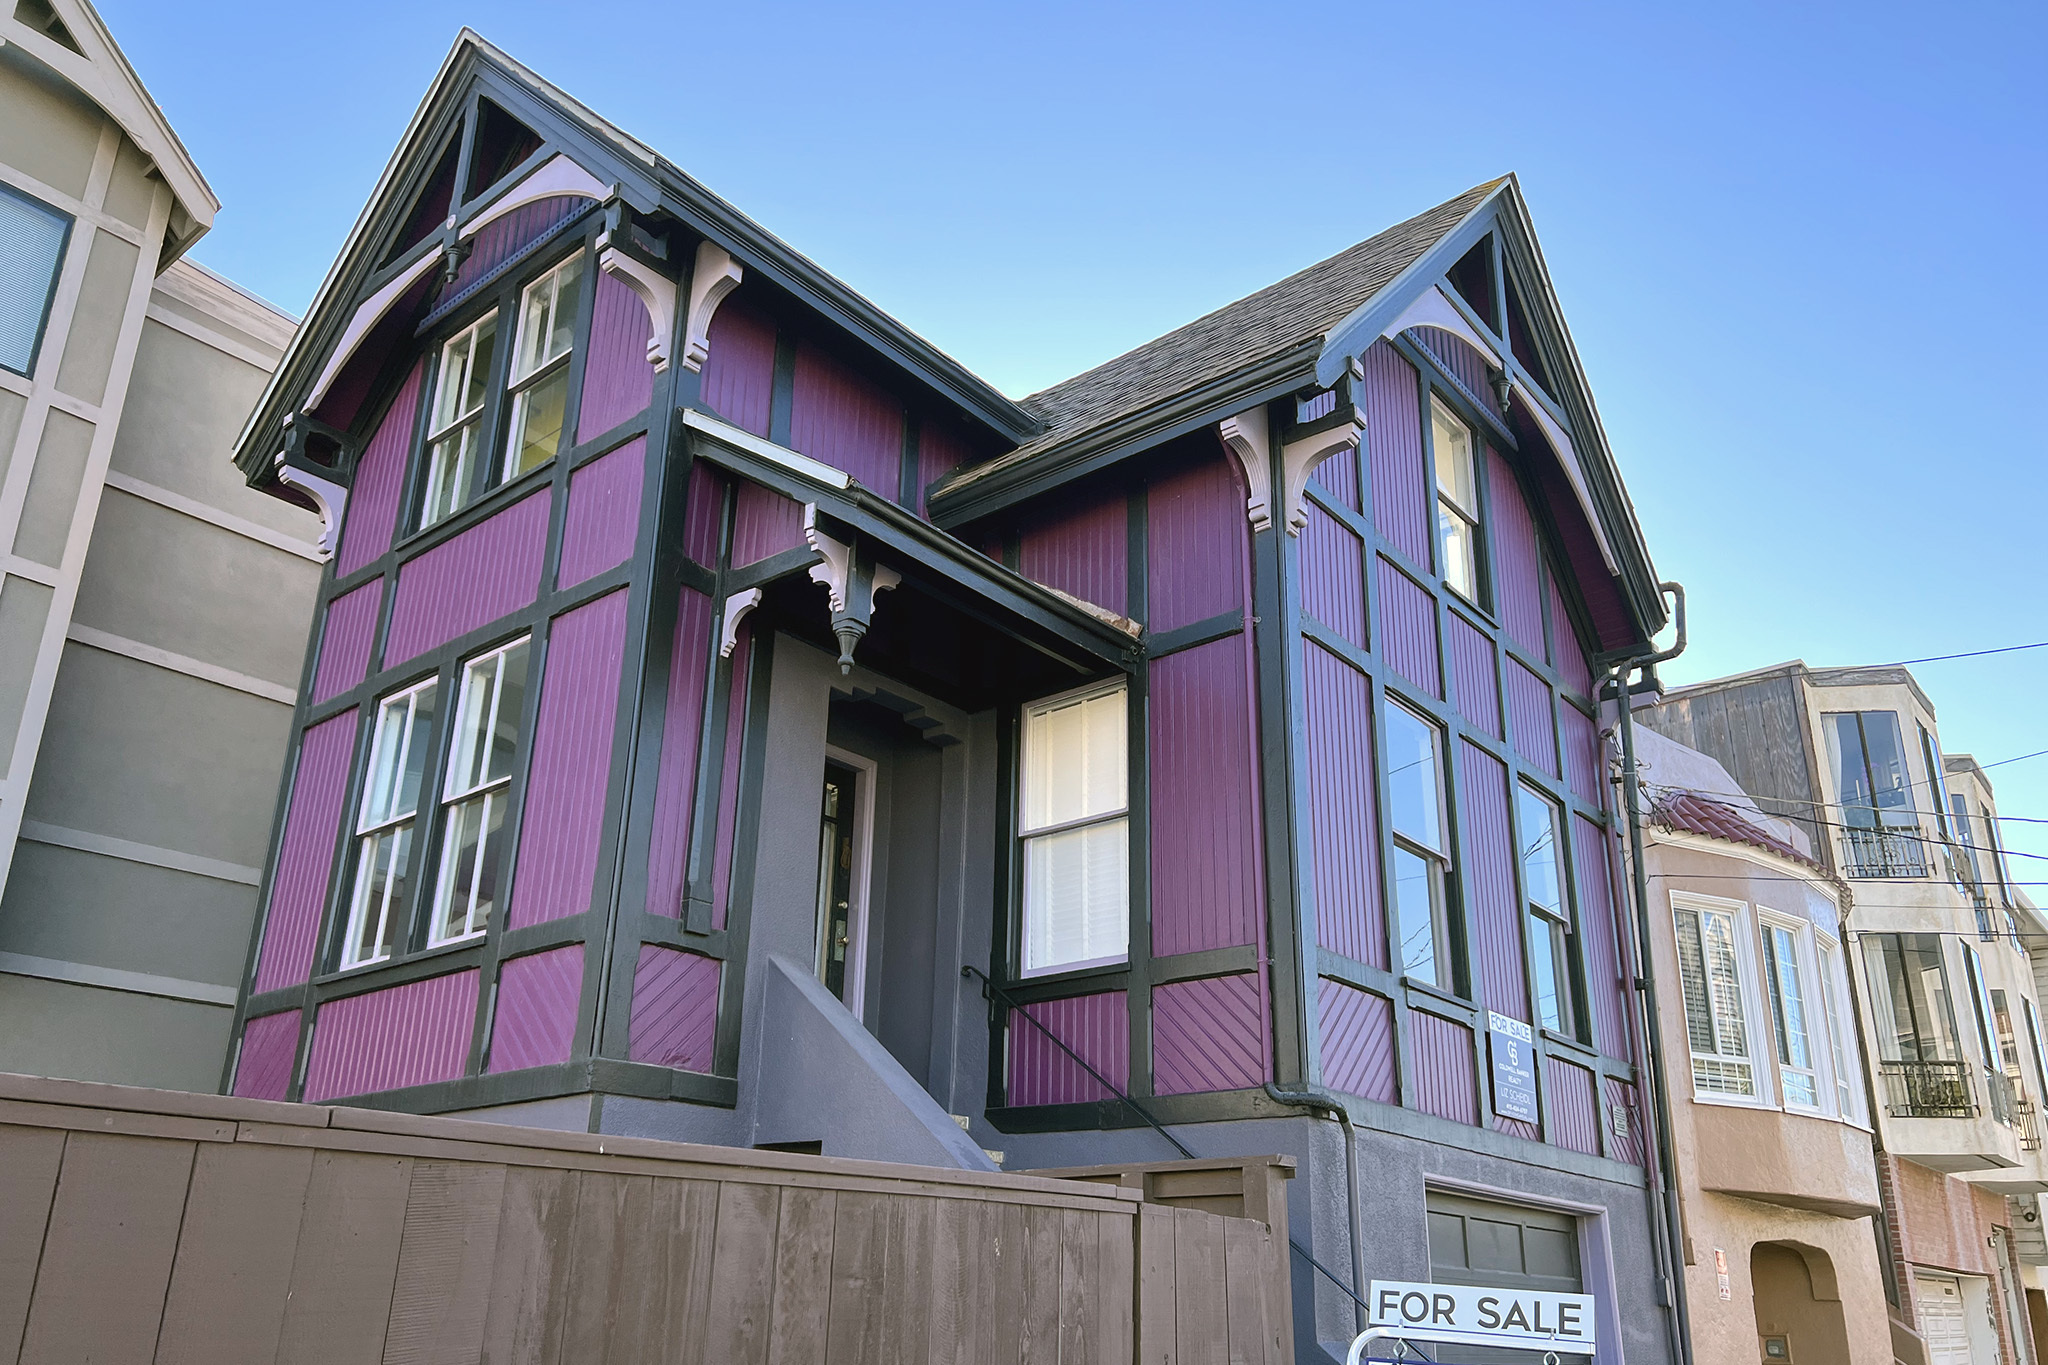 One of the oldest homes in San Francisco just hit the market